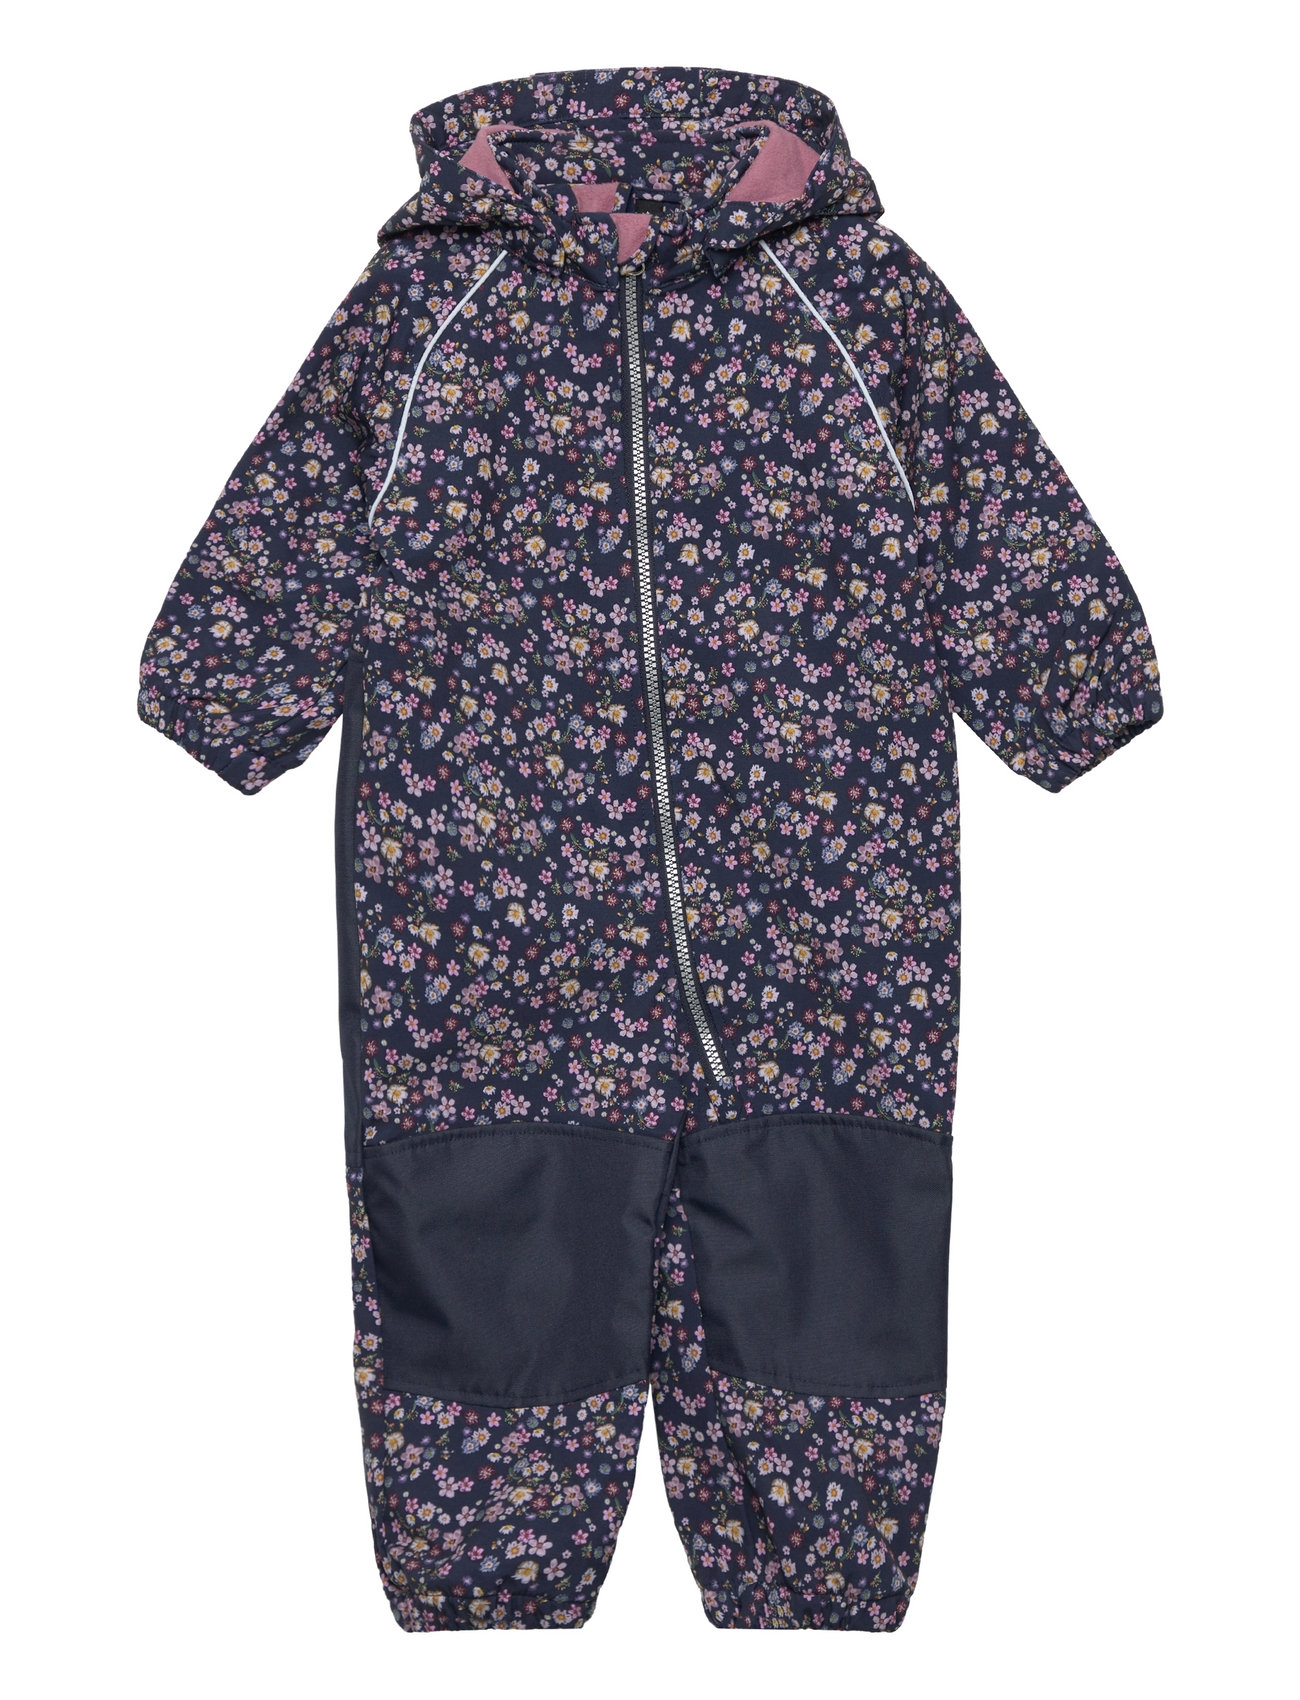 name it Nmfalfa08 Suit Liberty Flower Fo - 28.50 €. Buy Coveralls from name  it online at Boozt.com. Fast delivery and easy returns